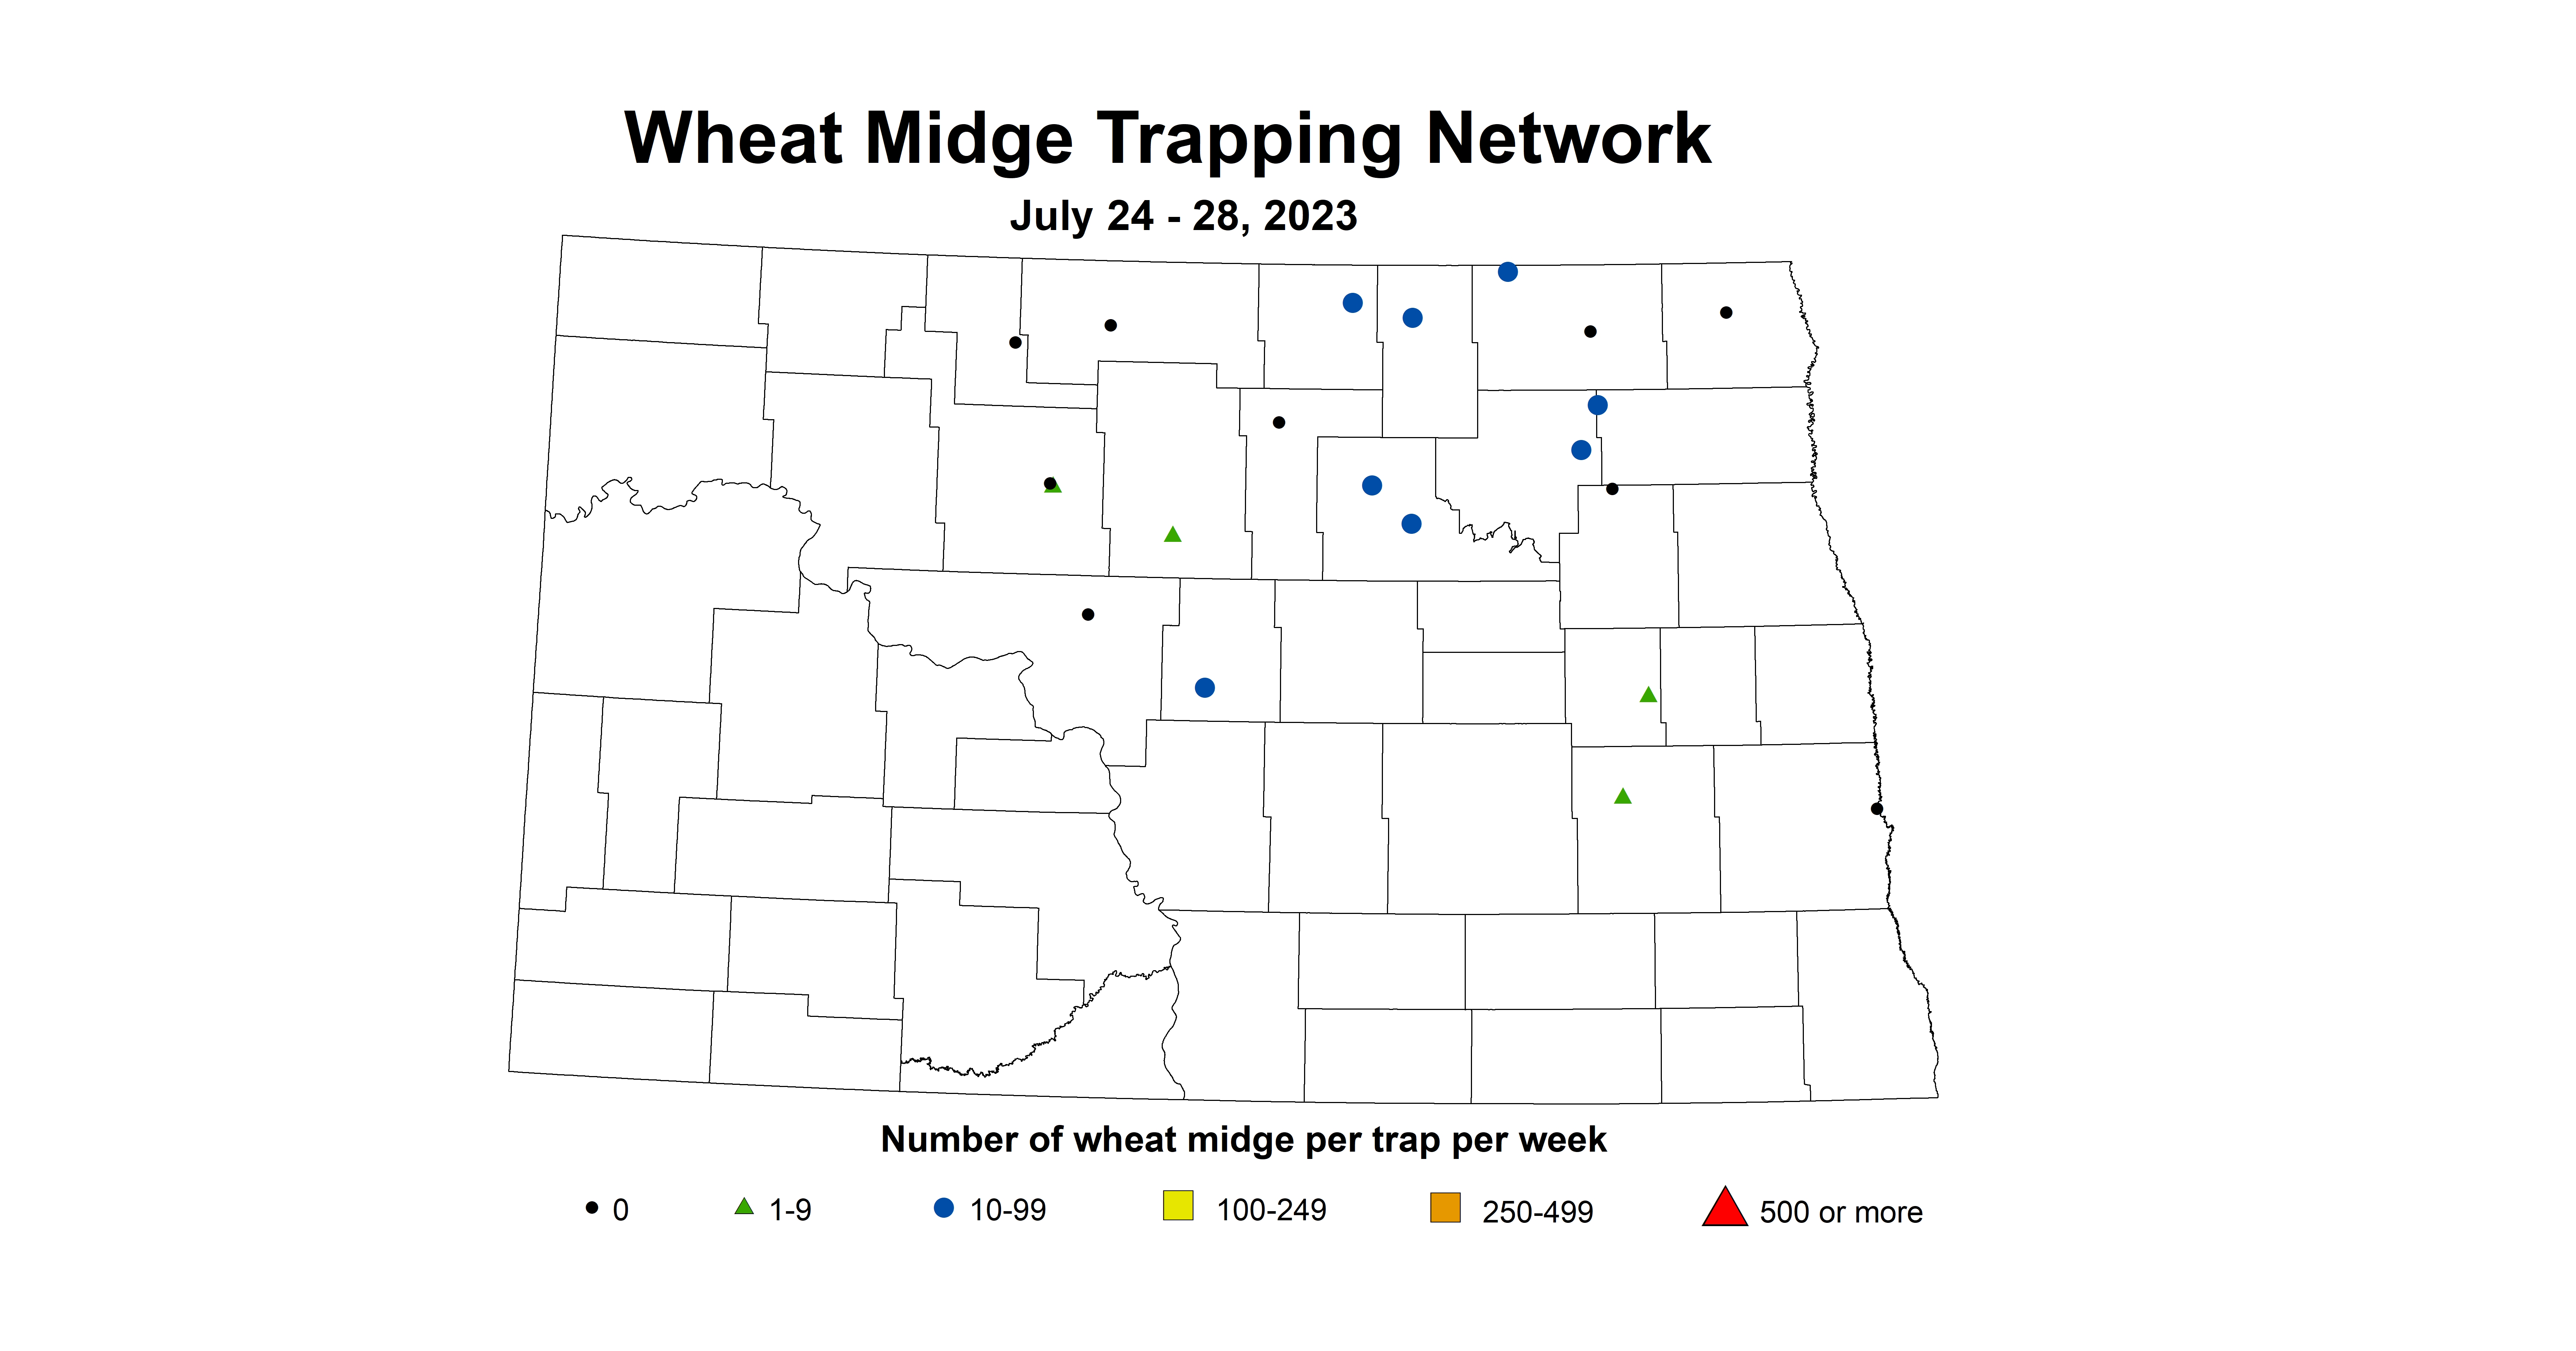 wheat midge trapping July 24-28 2023